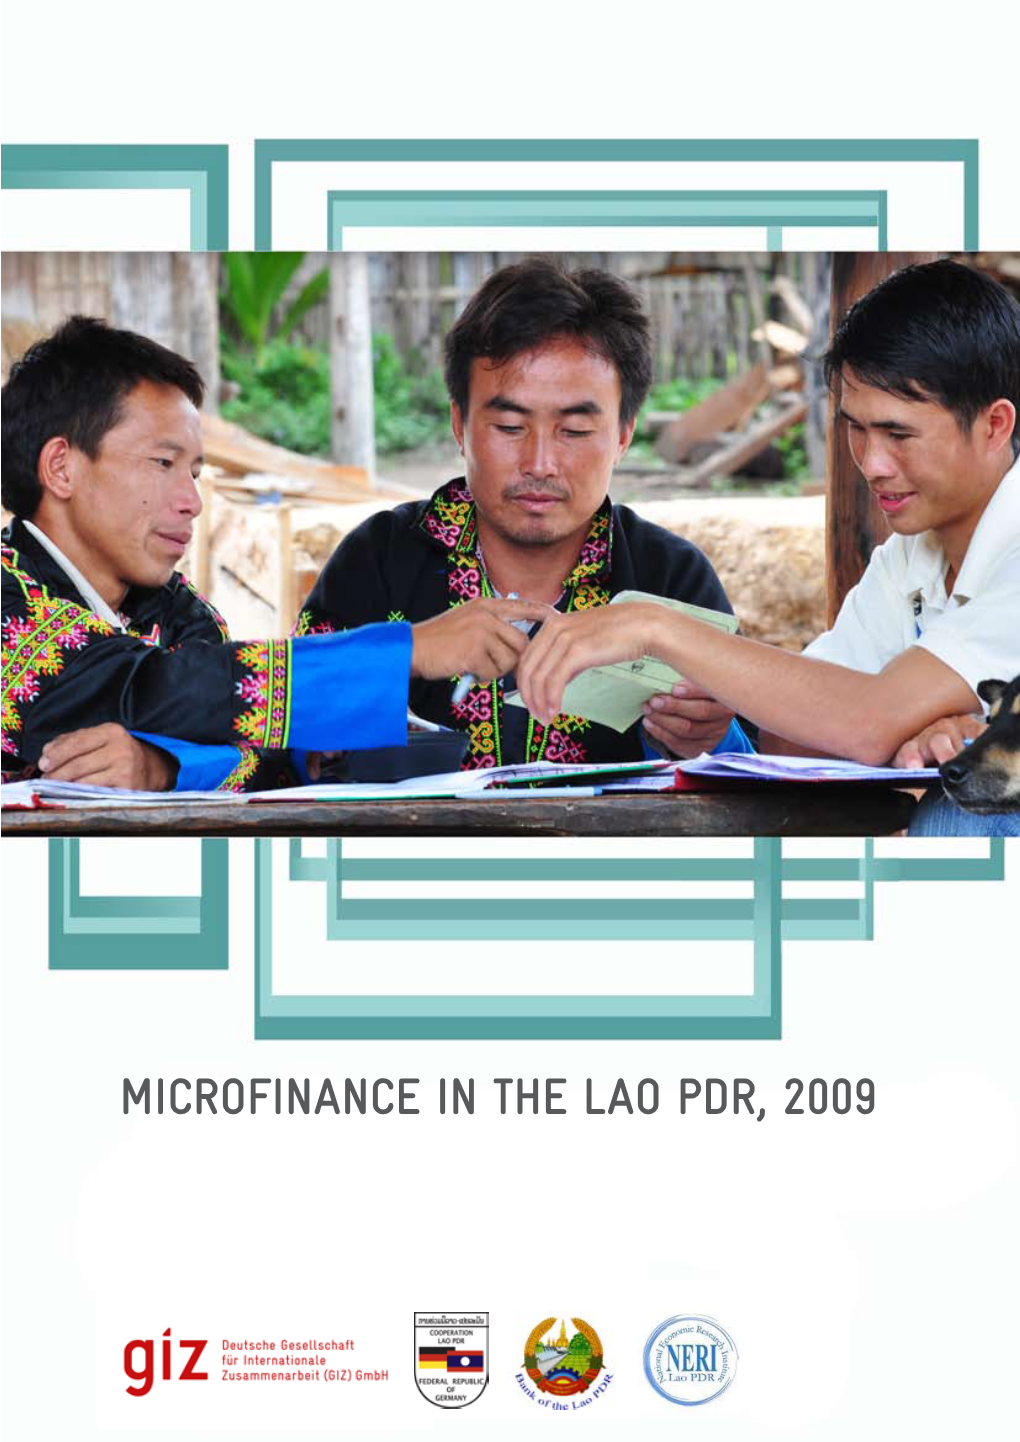 Microfinance in the Lao PDR 2009